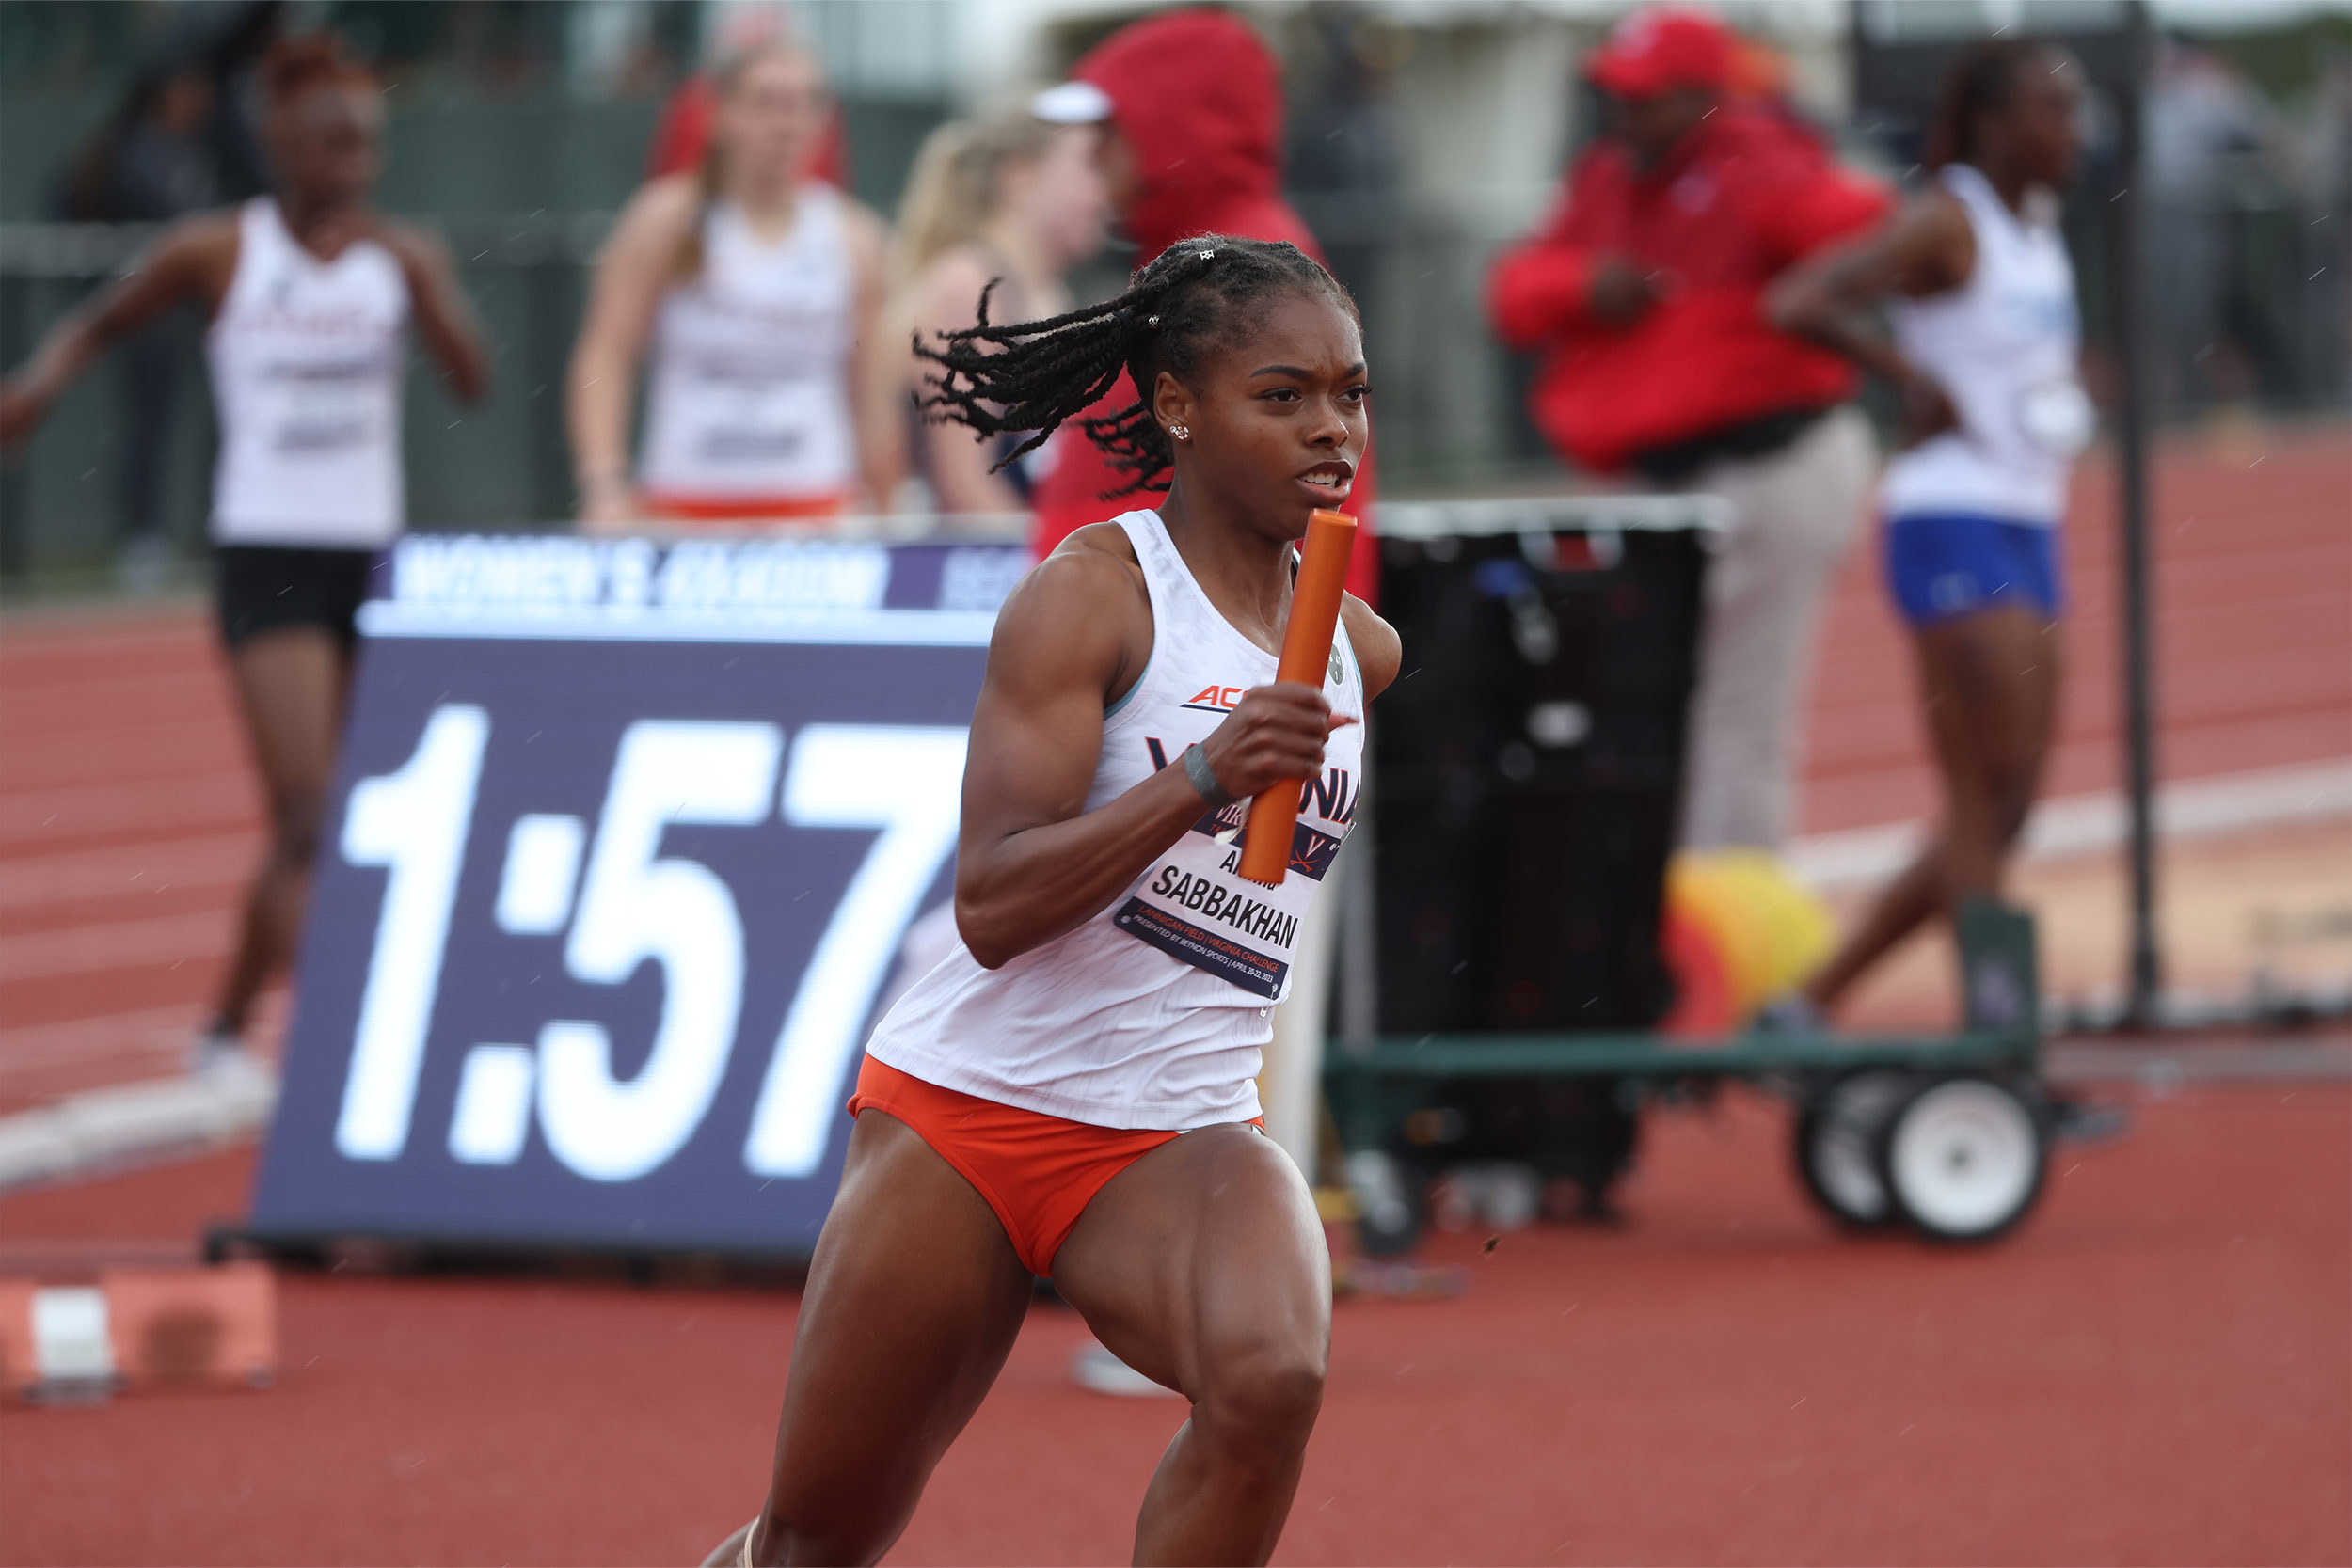 He Challenged This Female UVA Track Star to a Race. It Didn't Go as He  Planned